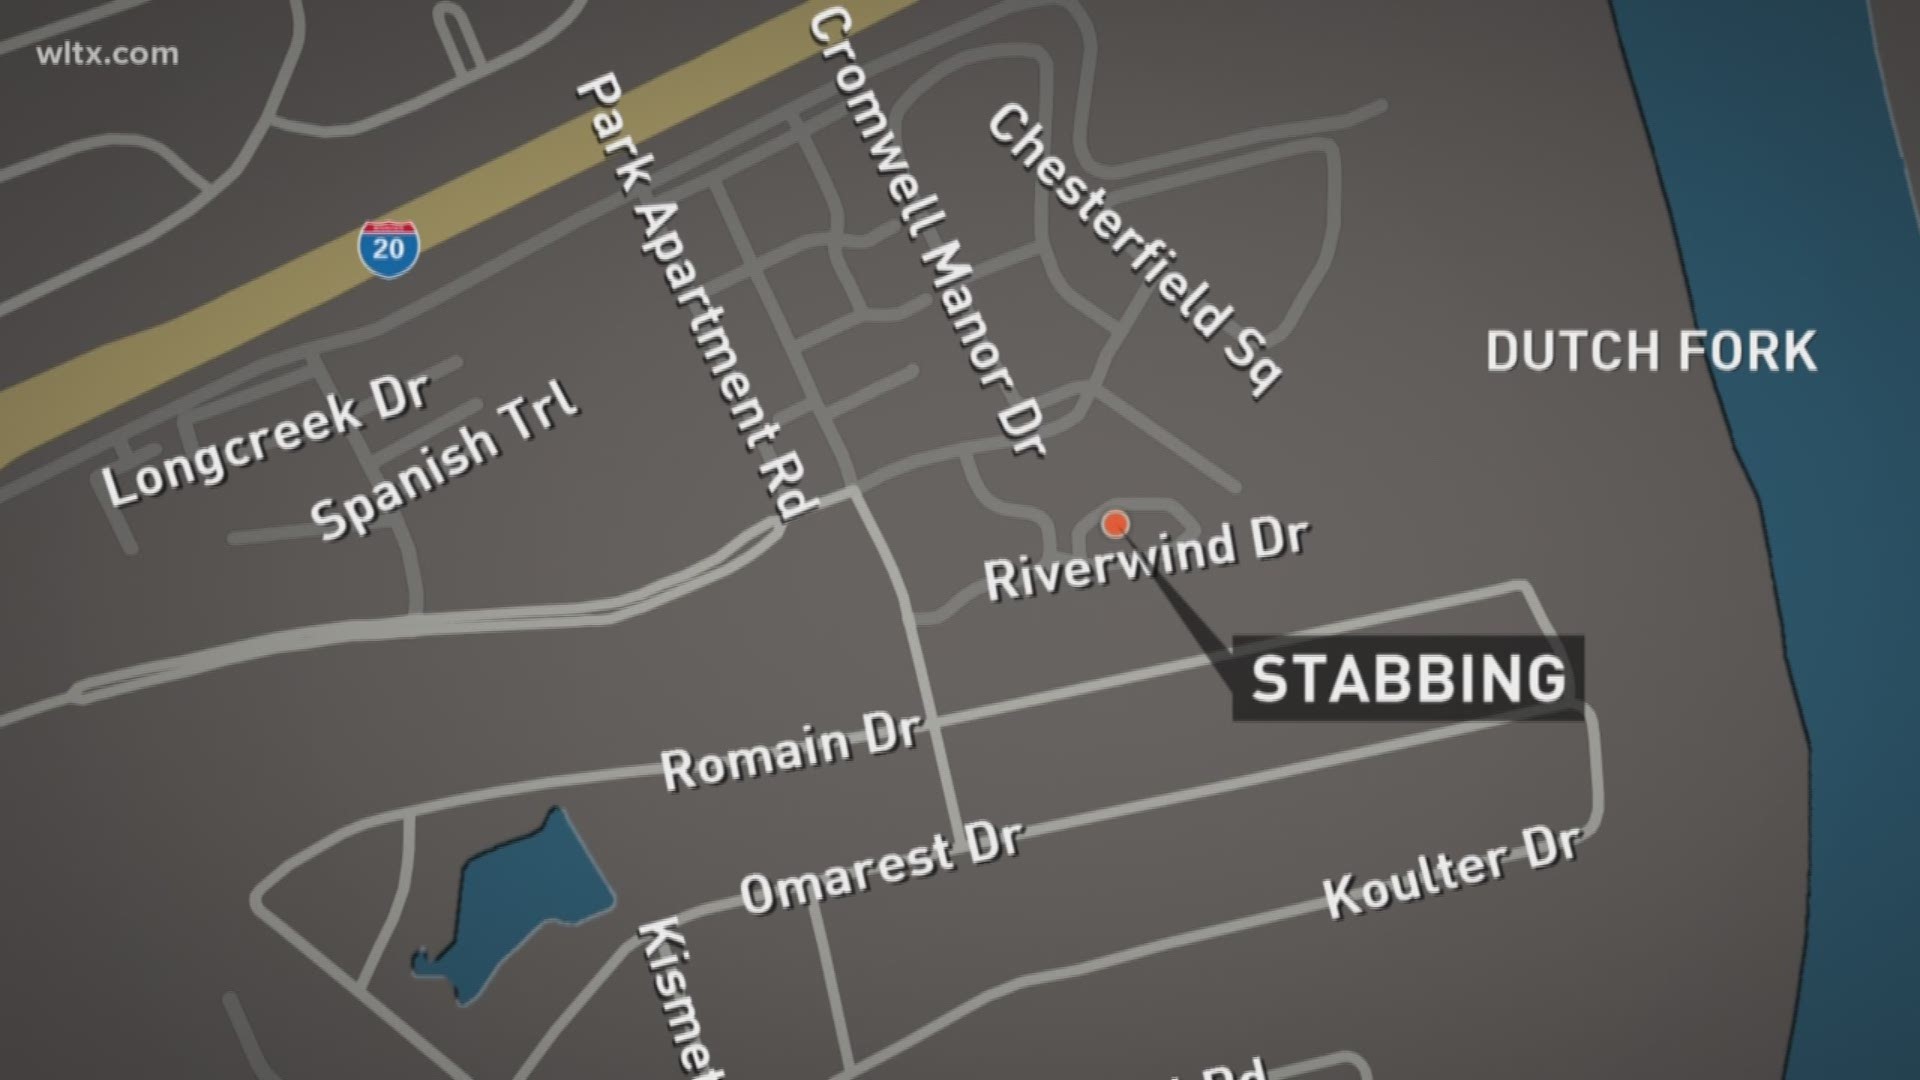 Richland Deputies are looking for a suspect connected to a stabbing incident this evening. 